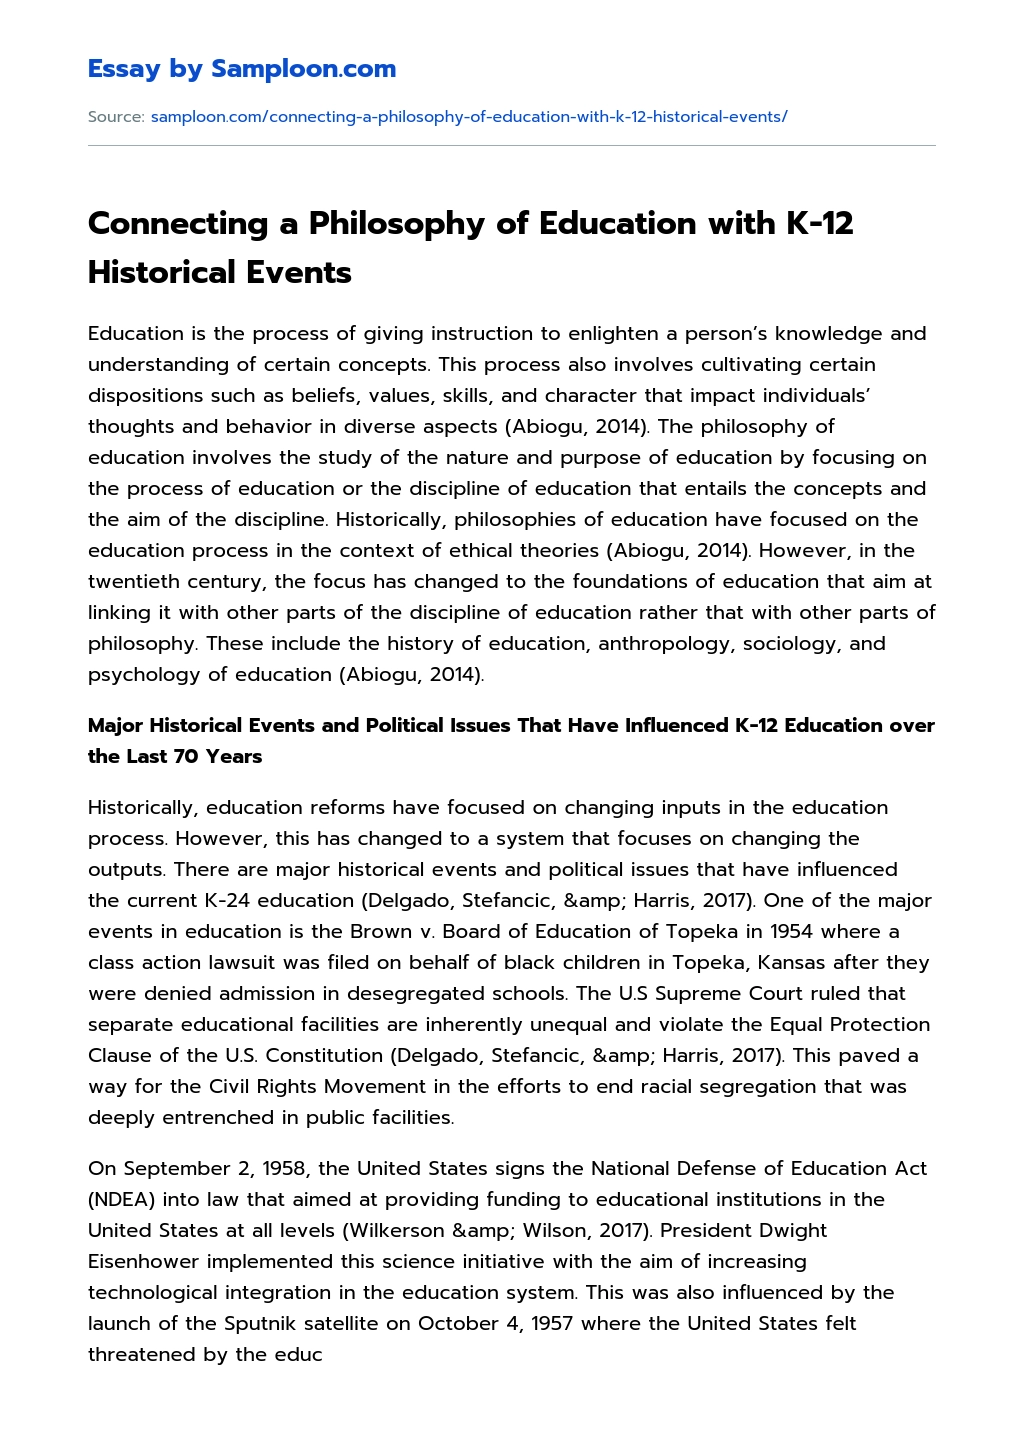 Connecting a Philosophy of Education with K-12 Historical Events Personal Essay essay